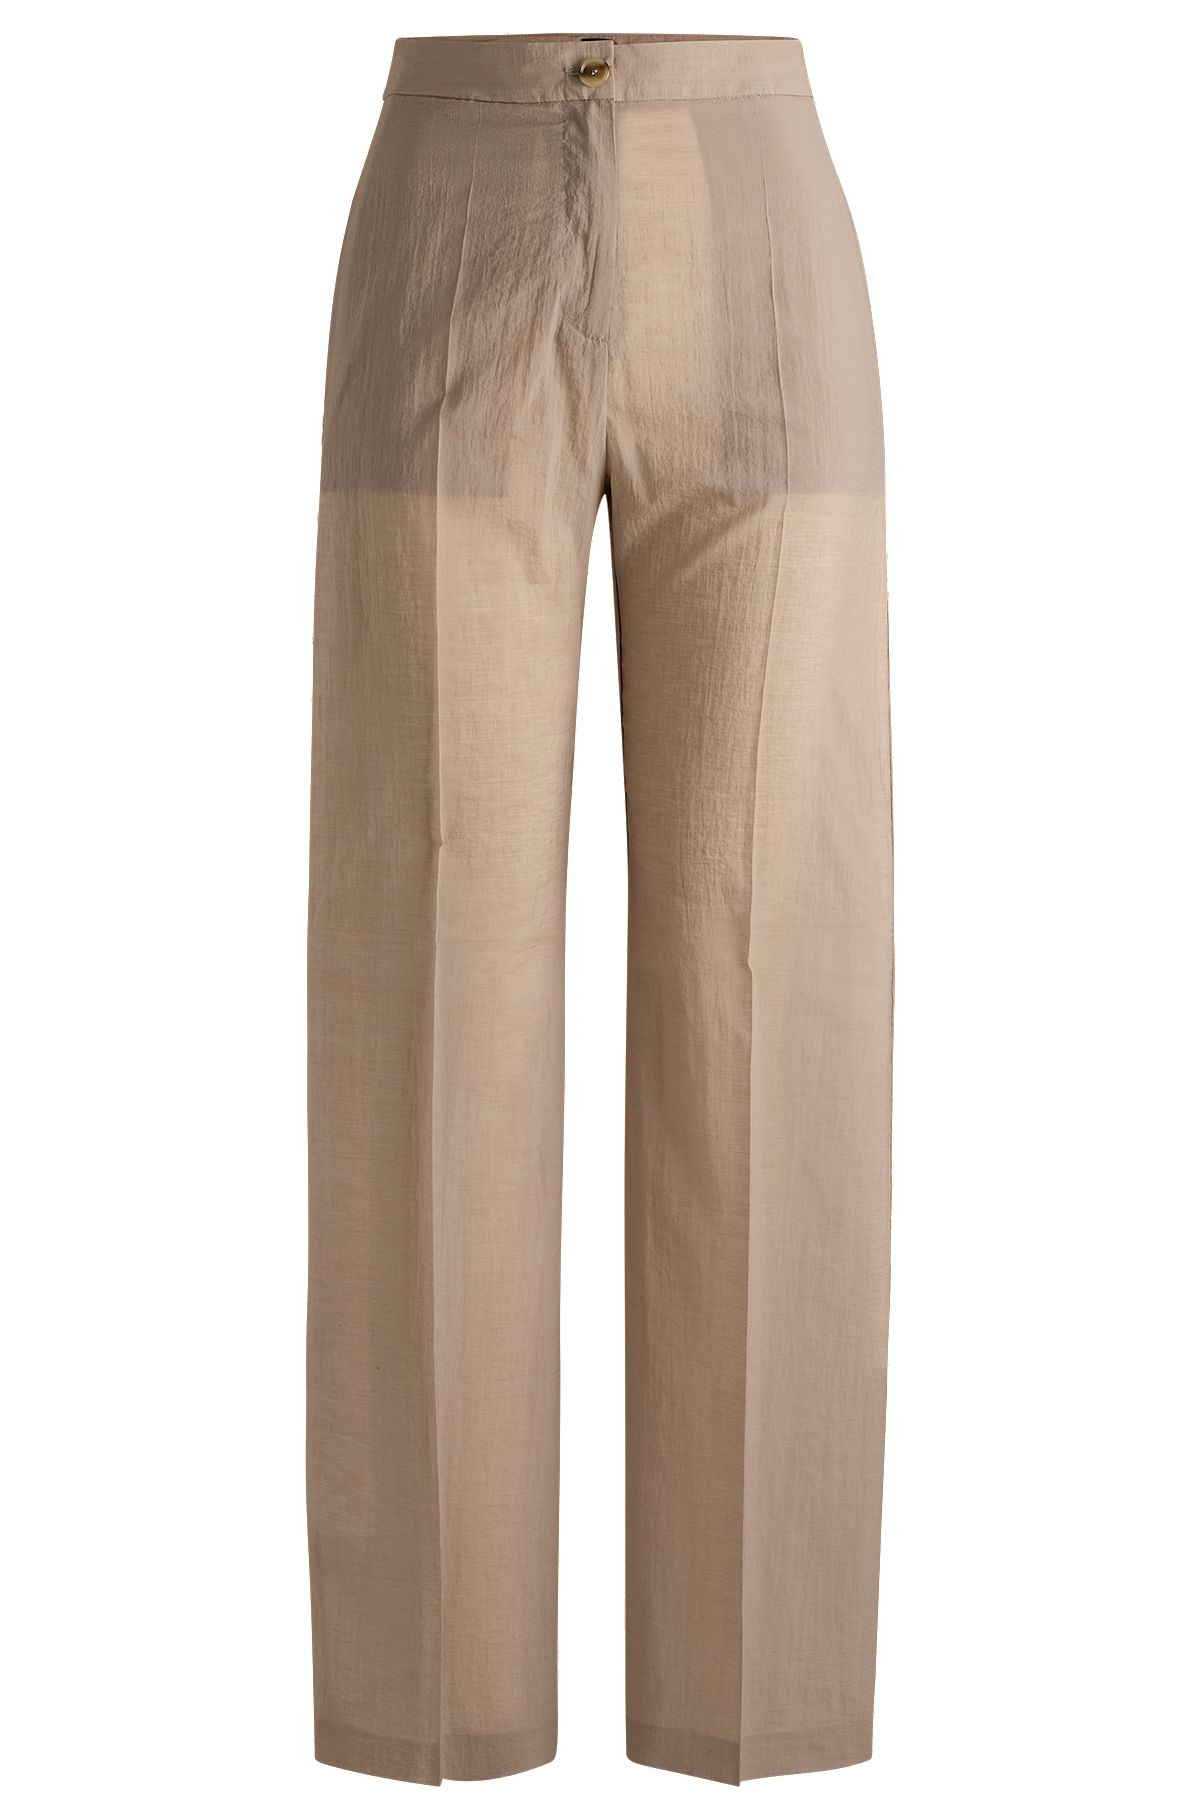 Relaxed-fit trousers, Light Beige